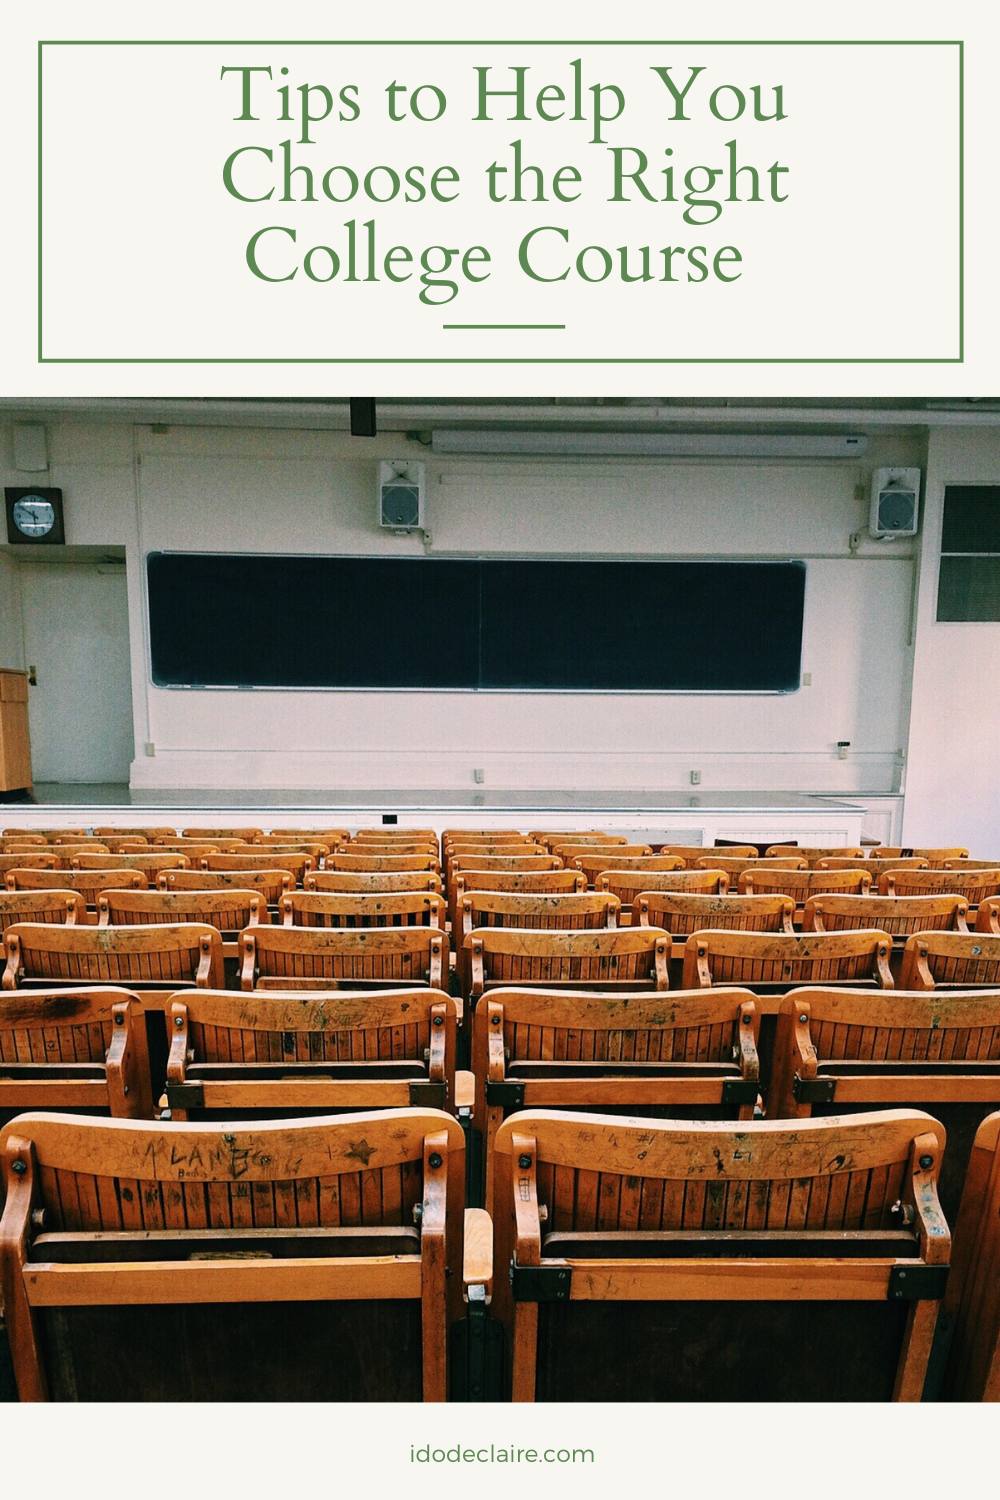 Tips to Help You Choose the Right College Course